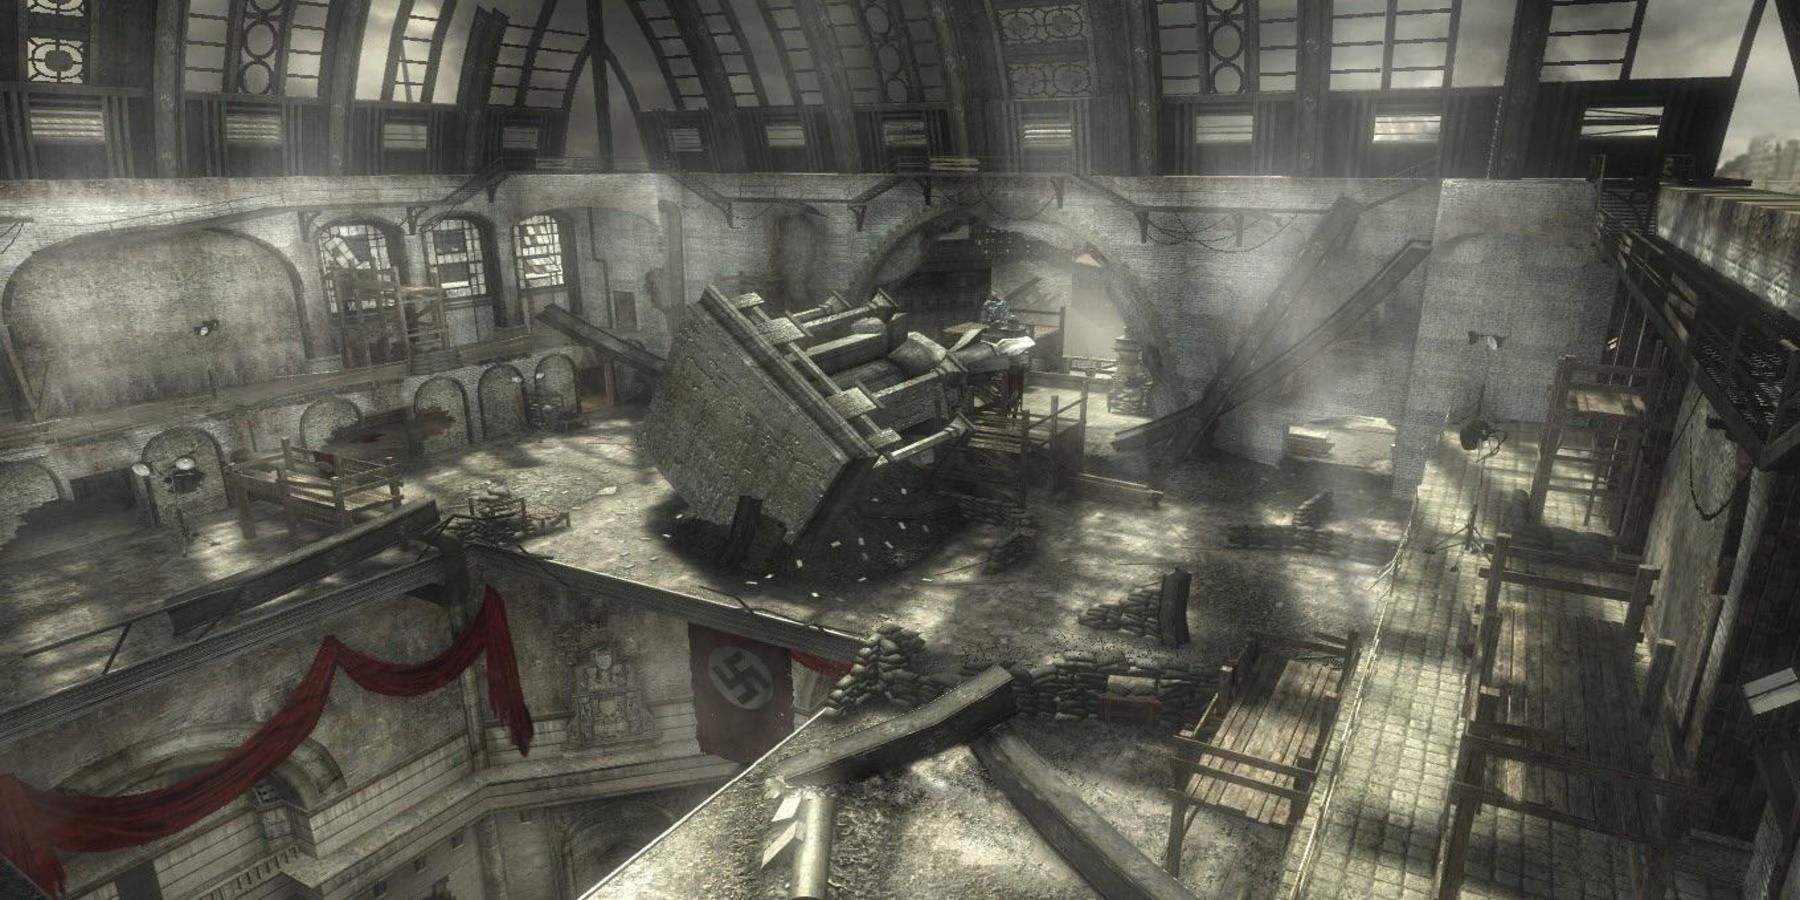 Call of Duty: Vanguard Confirms Two World at War Maps Are Returning